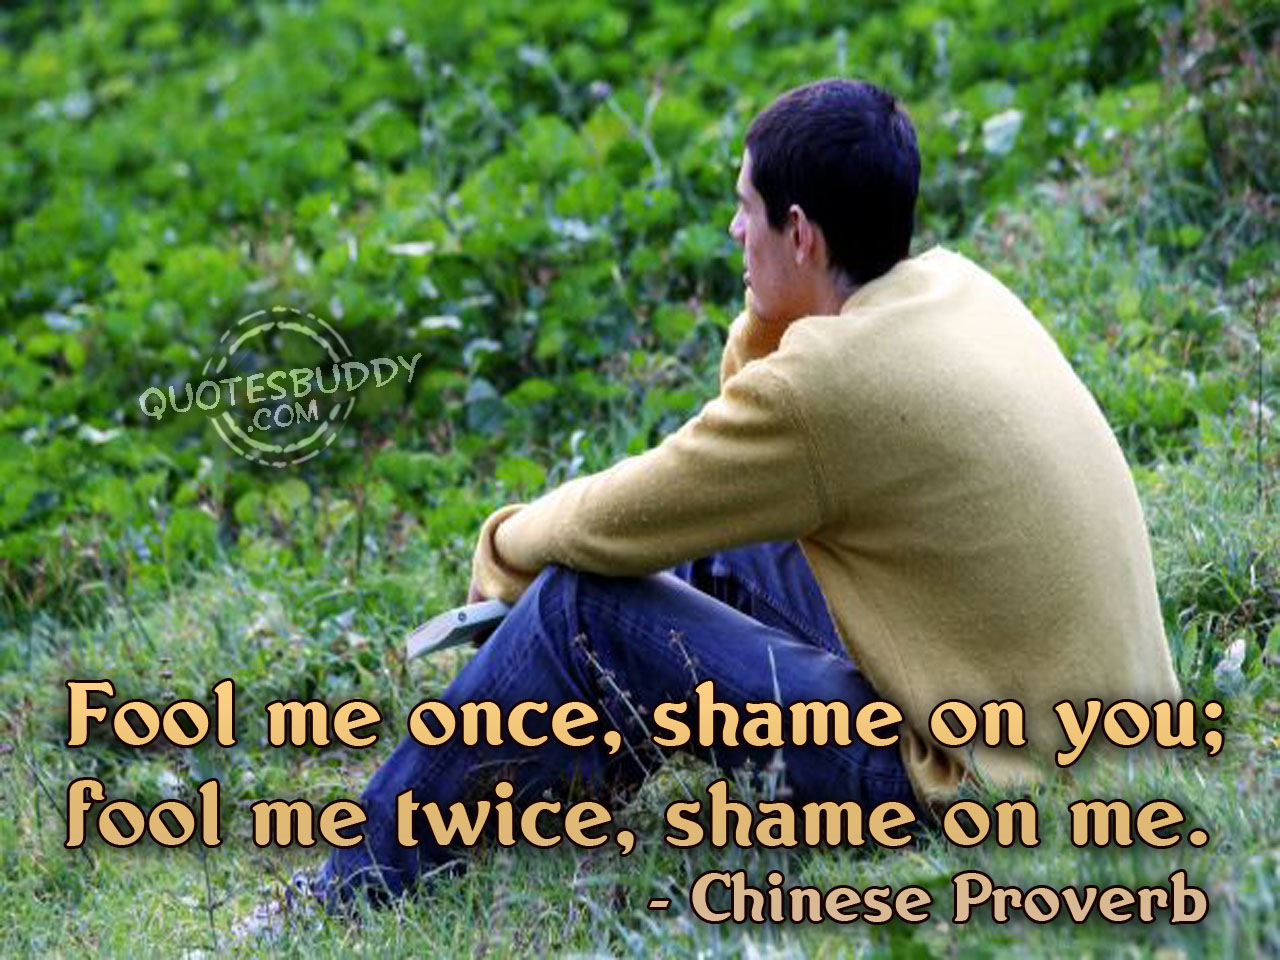 Fool me once, shame on you. Fool me twice, shame on me. Chinese Proverb